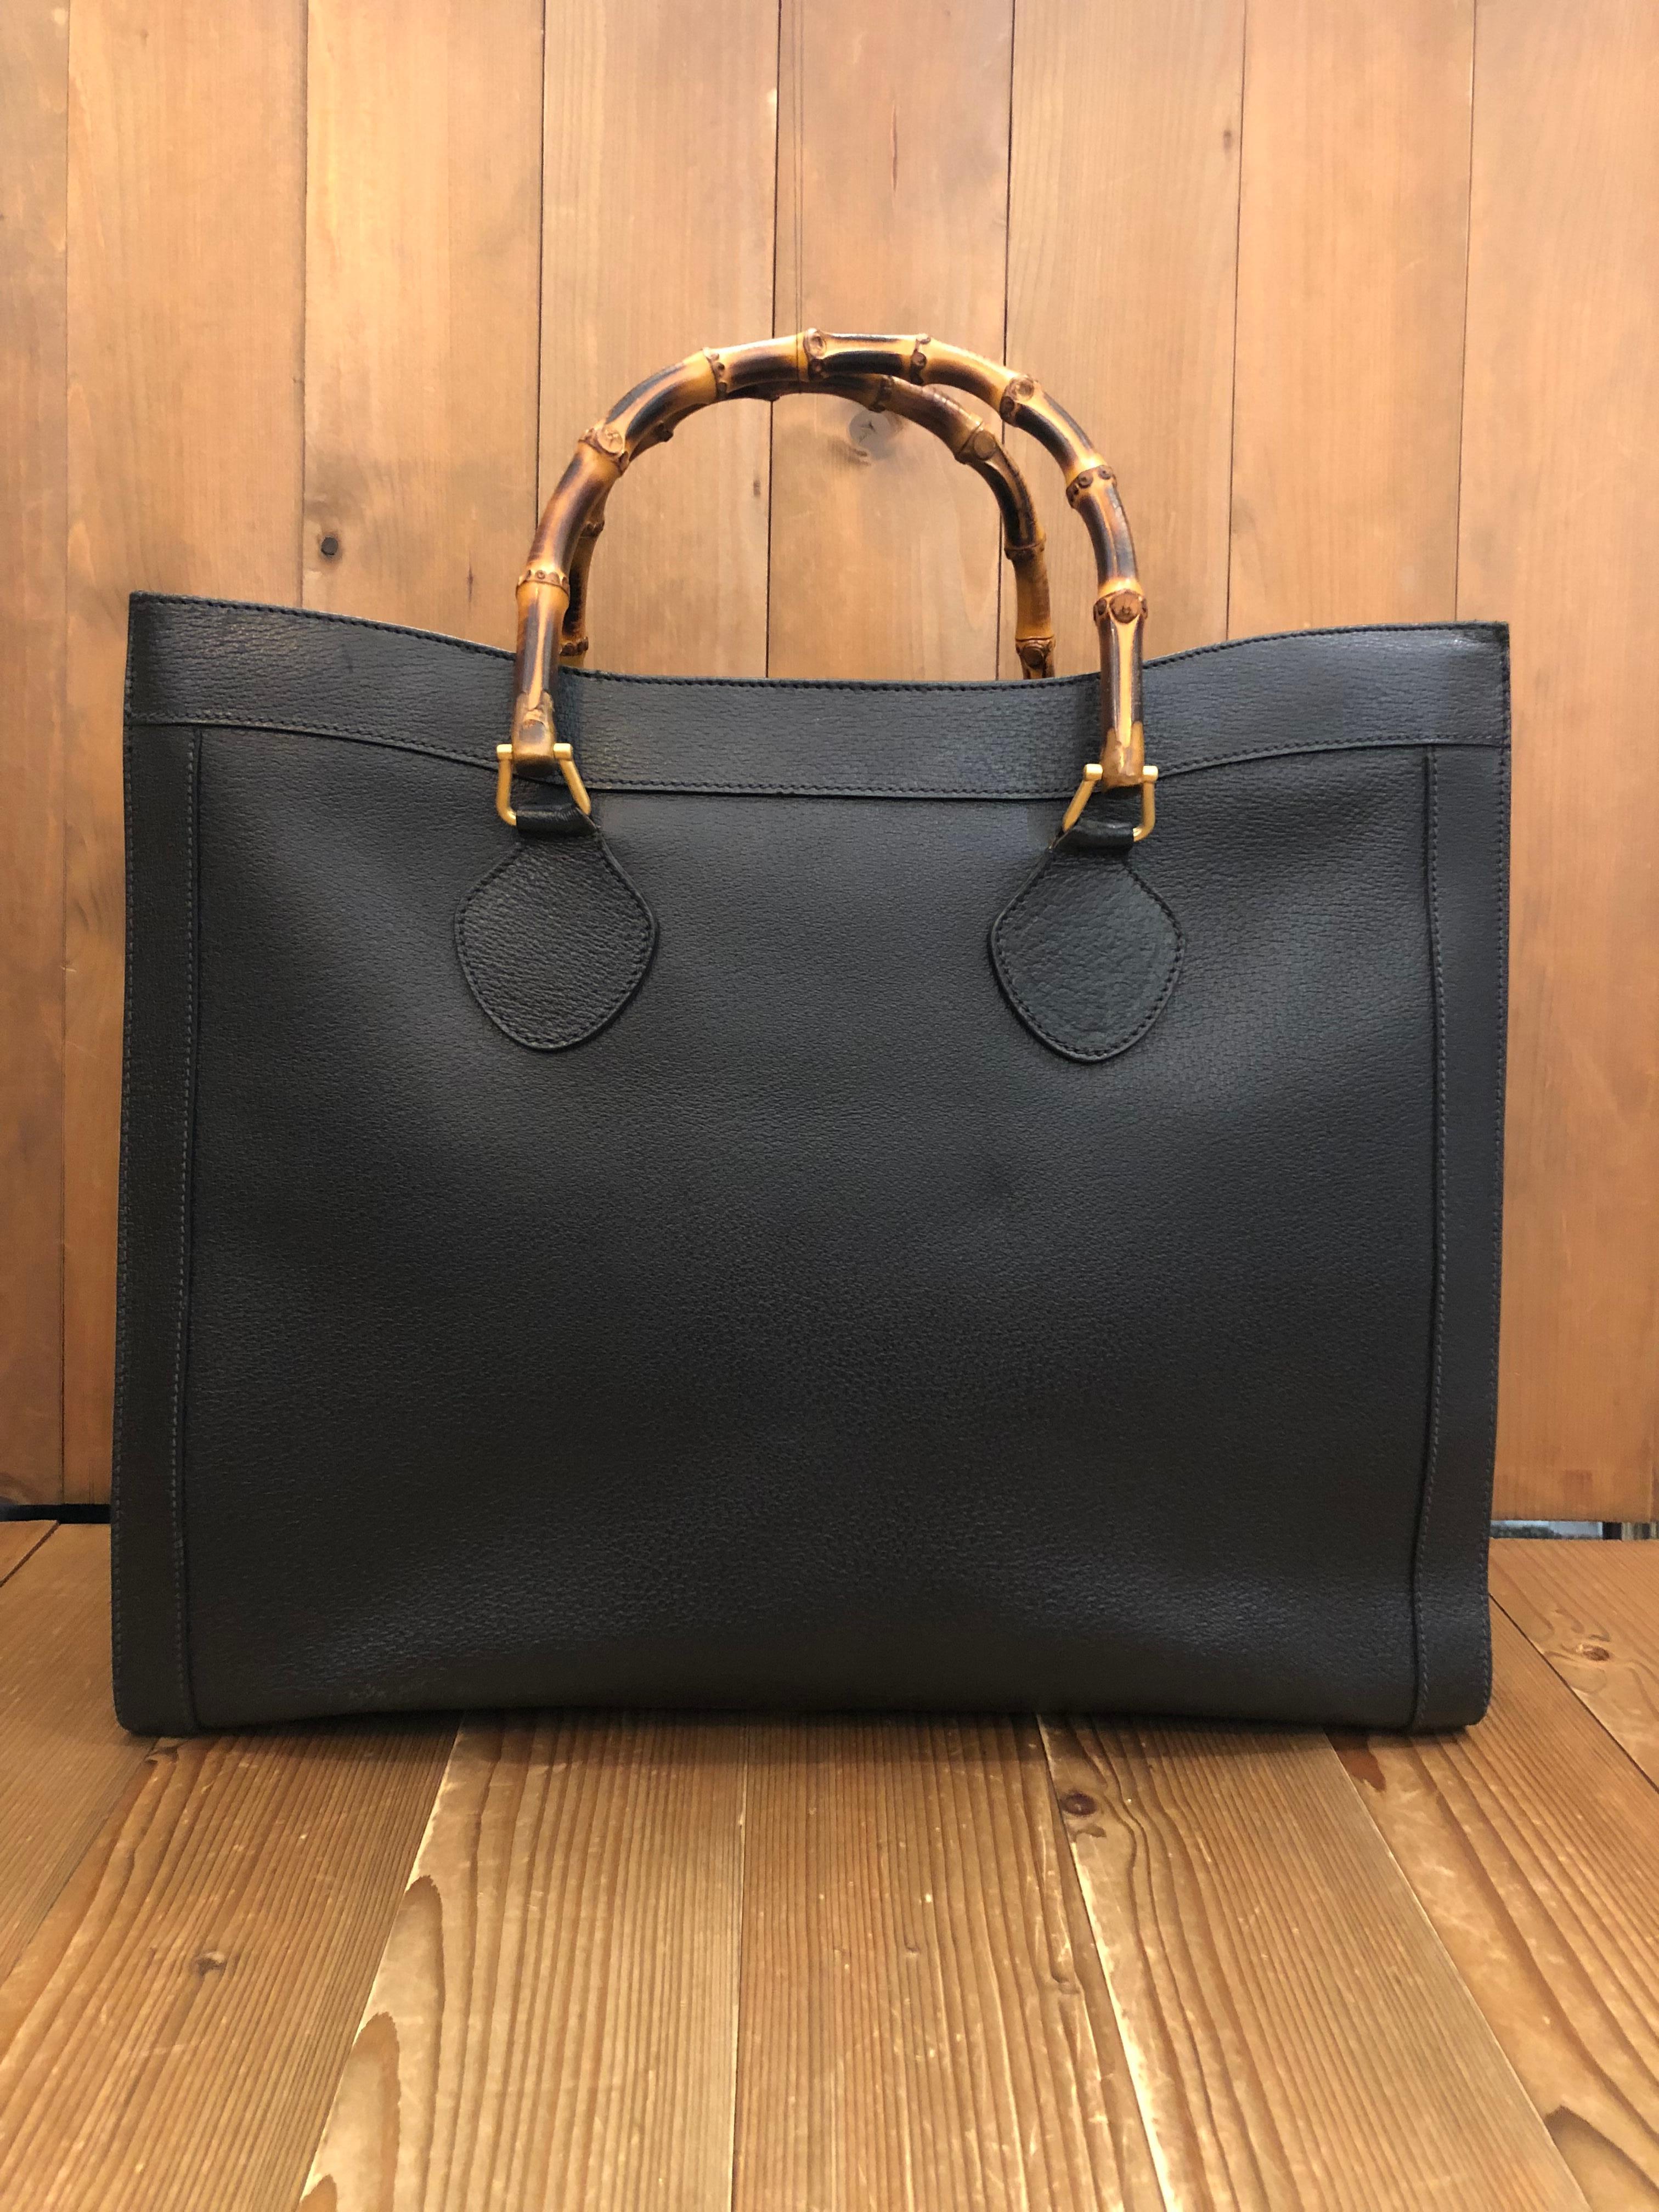 This vintage Gucci Diana Bamboo tote is crafted of pigskin leather in black featuring matte gold toned hardware. Top flap magnetic snap closure opens a new interior in black featuring two main open compartments and one middle zippered compartments